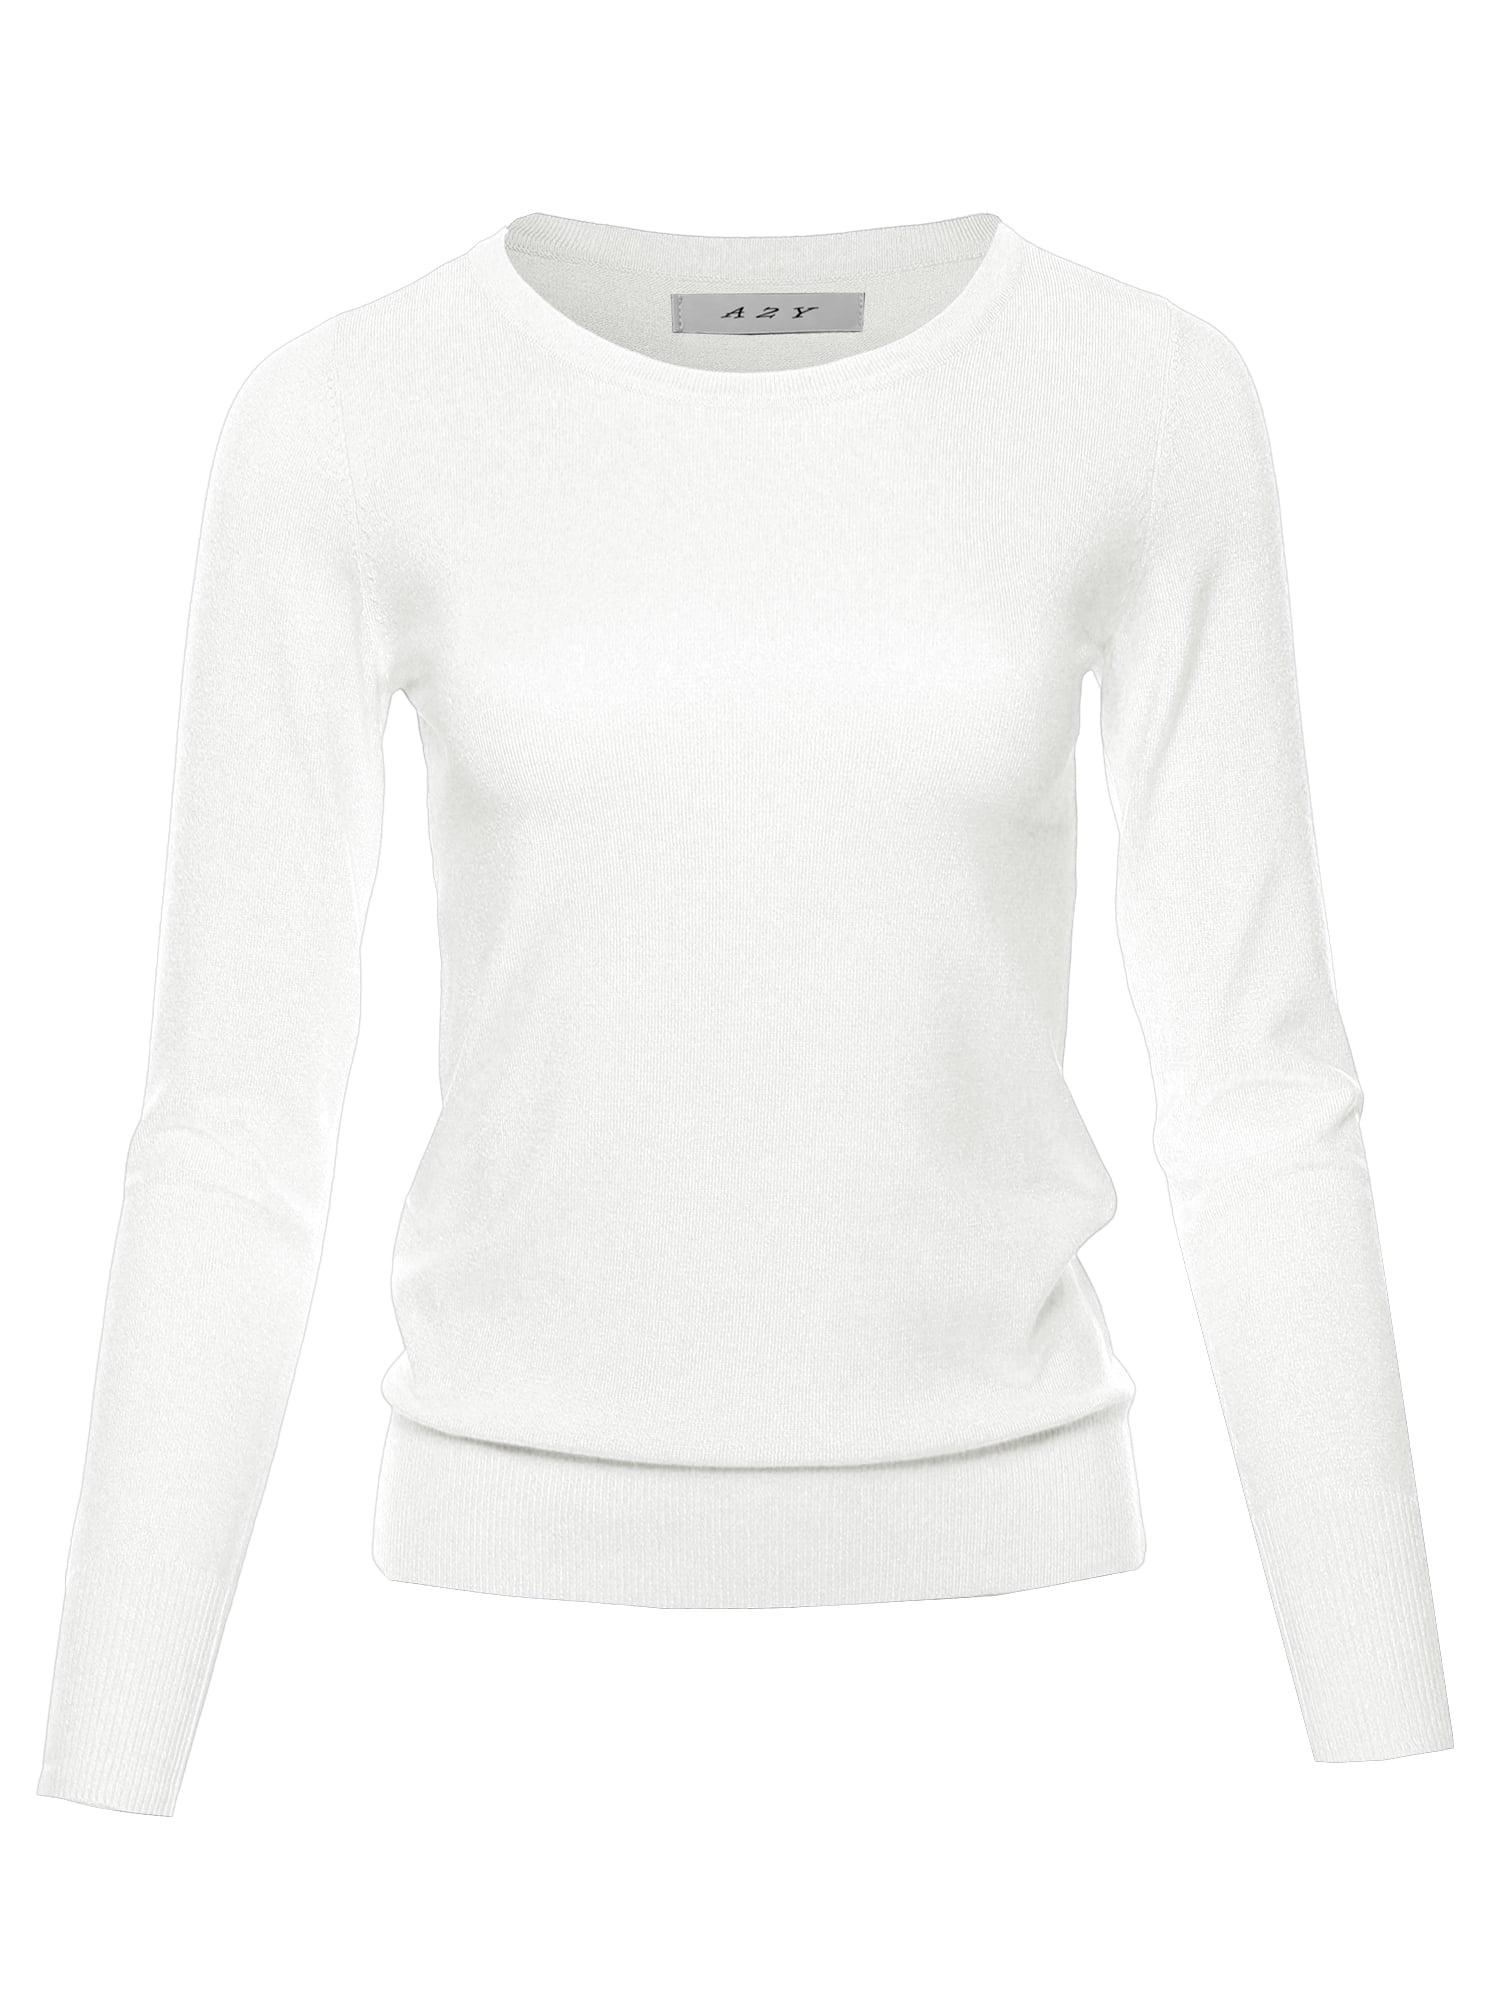 A2Y Women's Fitted Crew Neck Long Sleeve Pullover Classic Sweater White ...